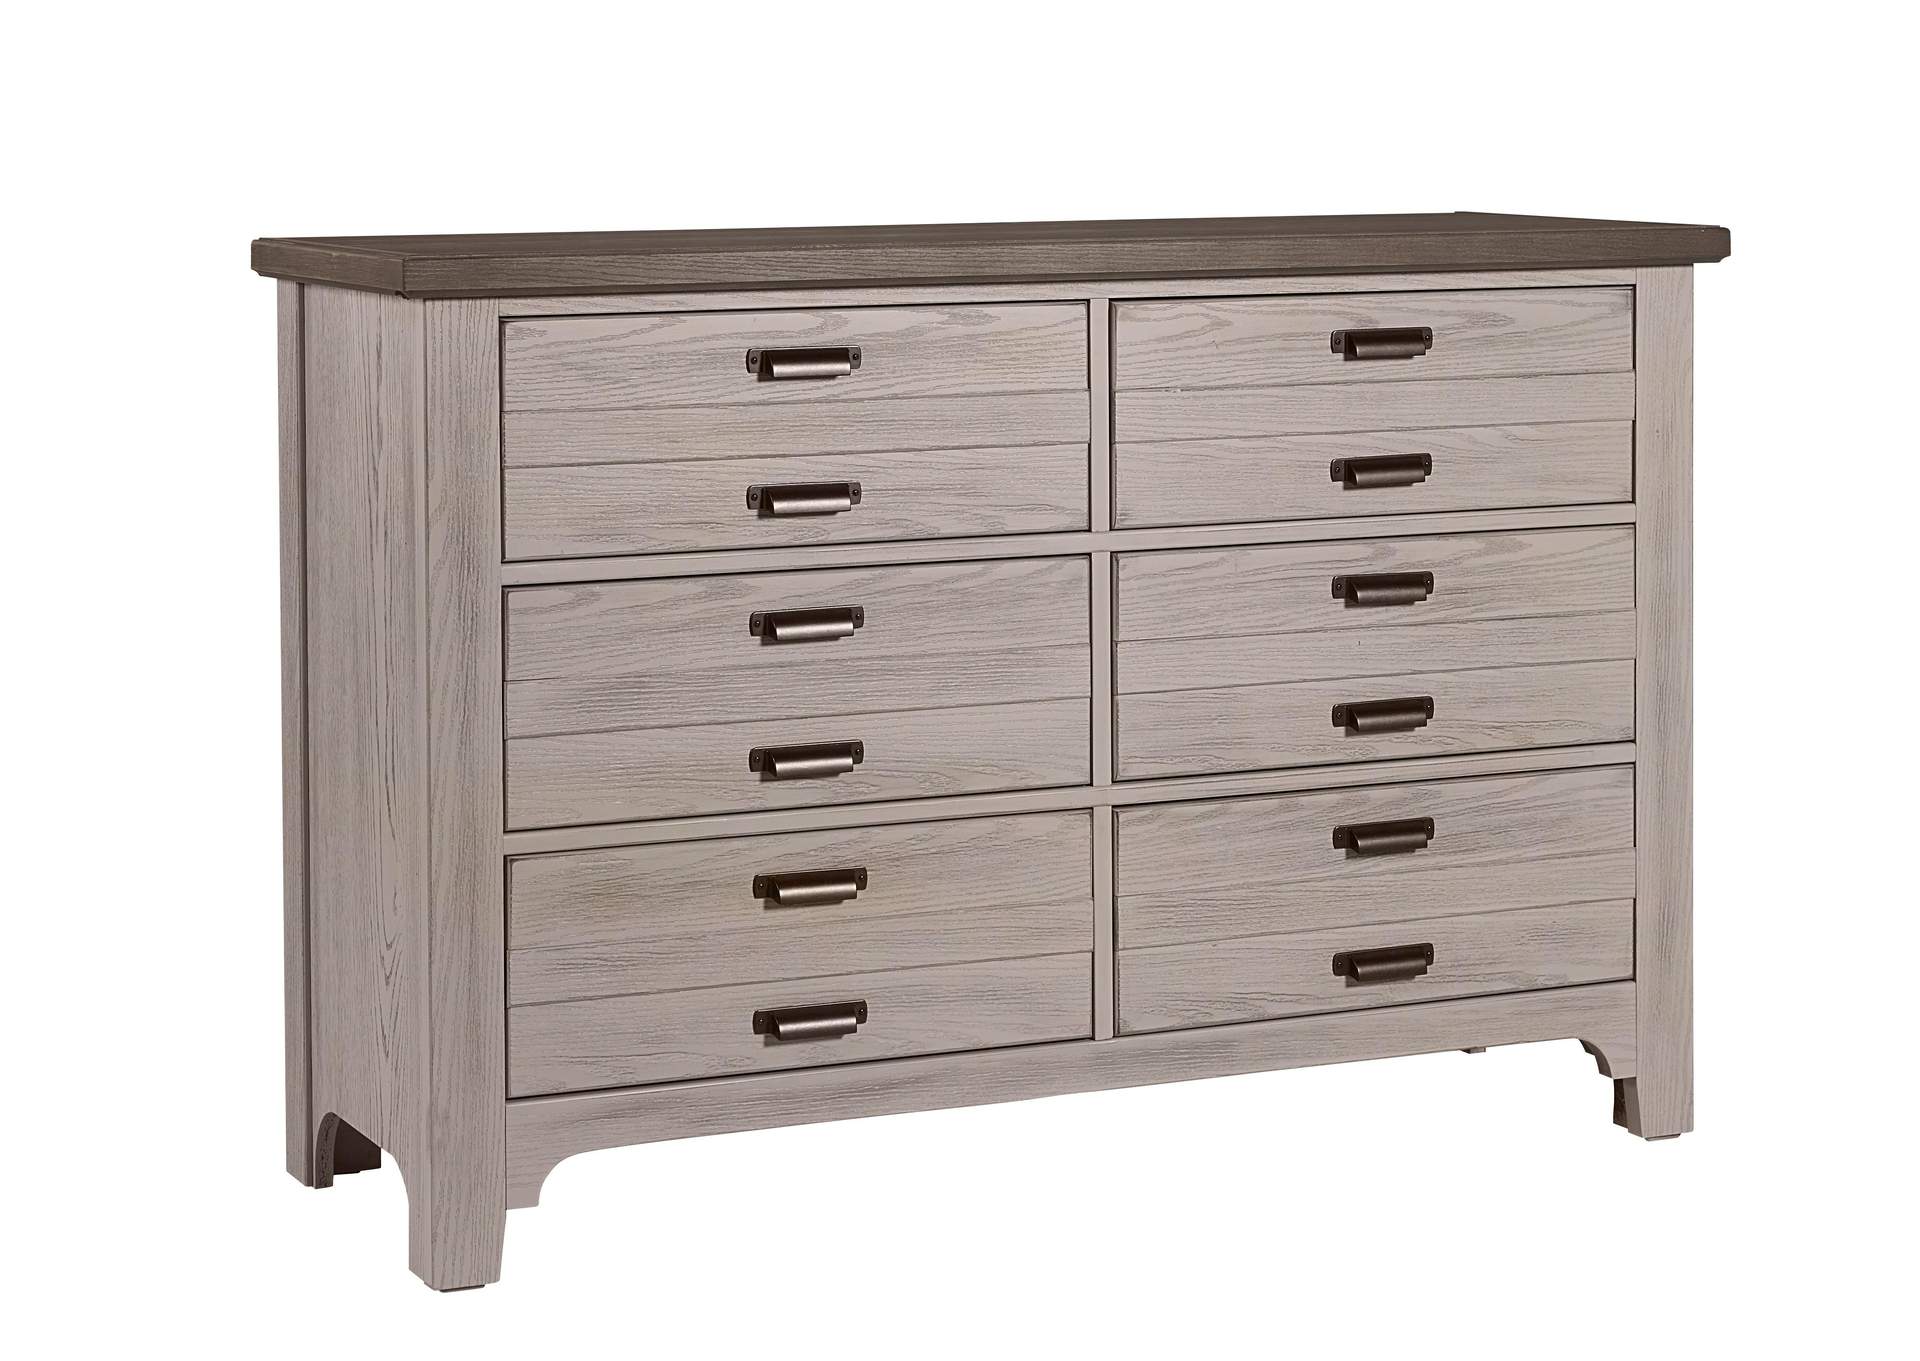 Bungalow Dover Grey with Folkstone Top Double Dresser - 6 Drawer